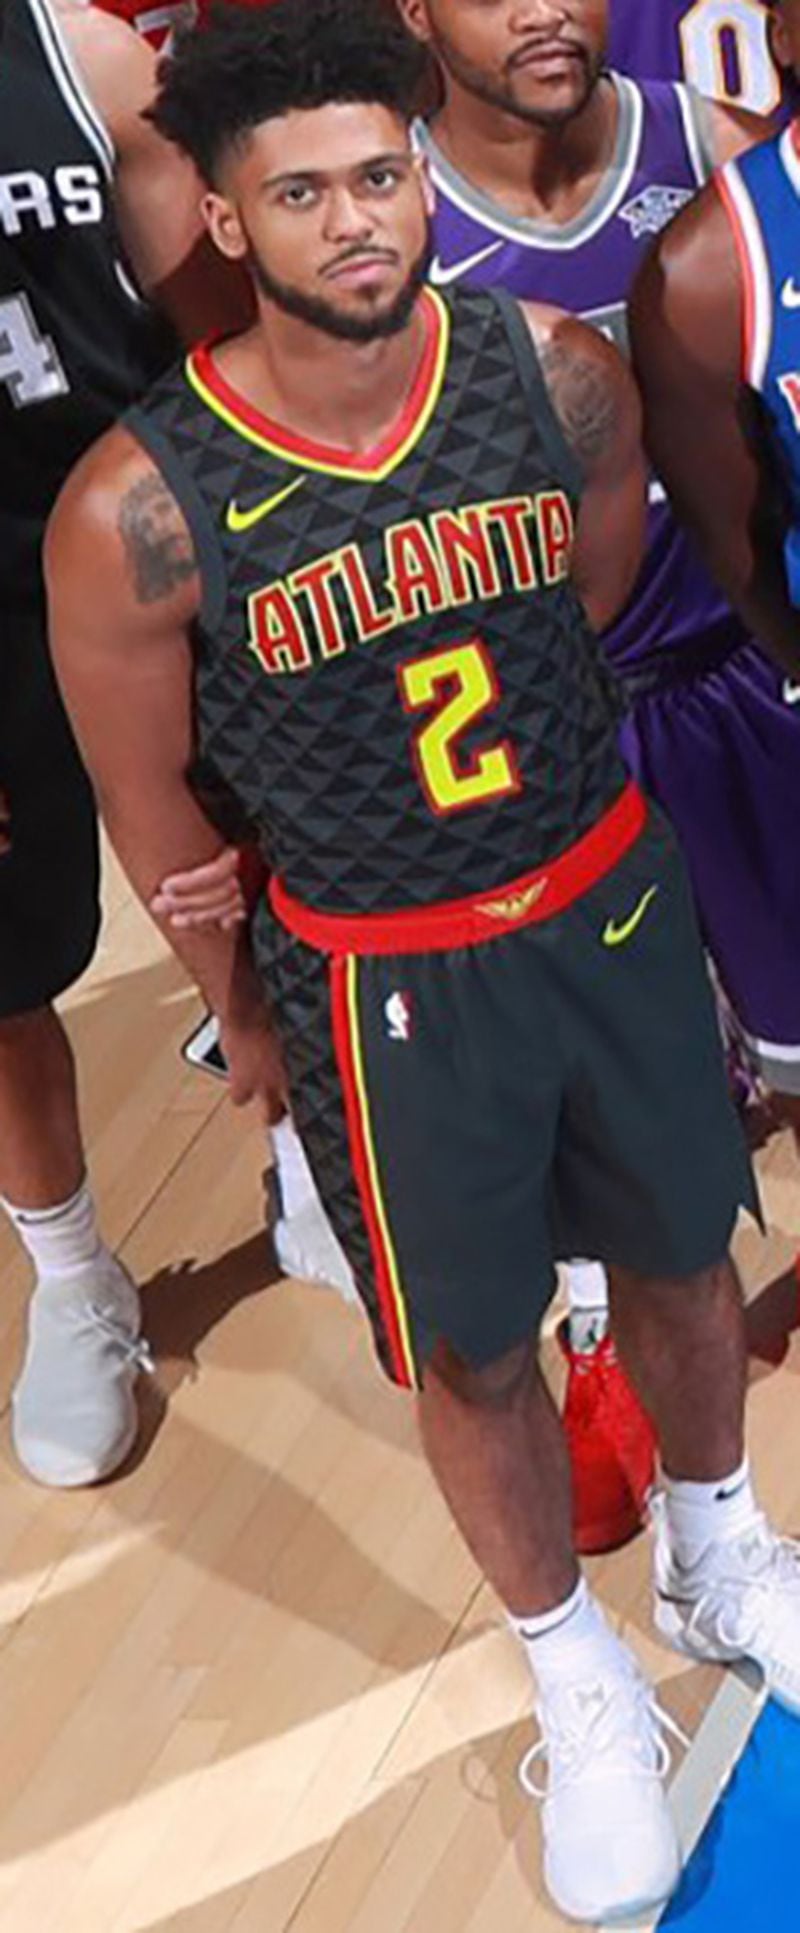 A close-up of Hawks rookie Tyler Dorsey wearing the team's new Nike uniform from the NBA rookie photo shoot Friday.